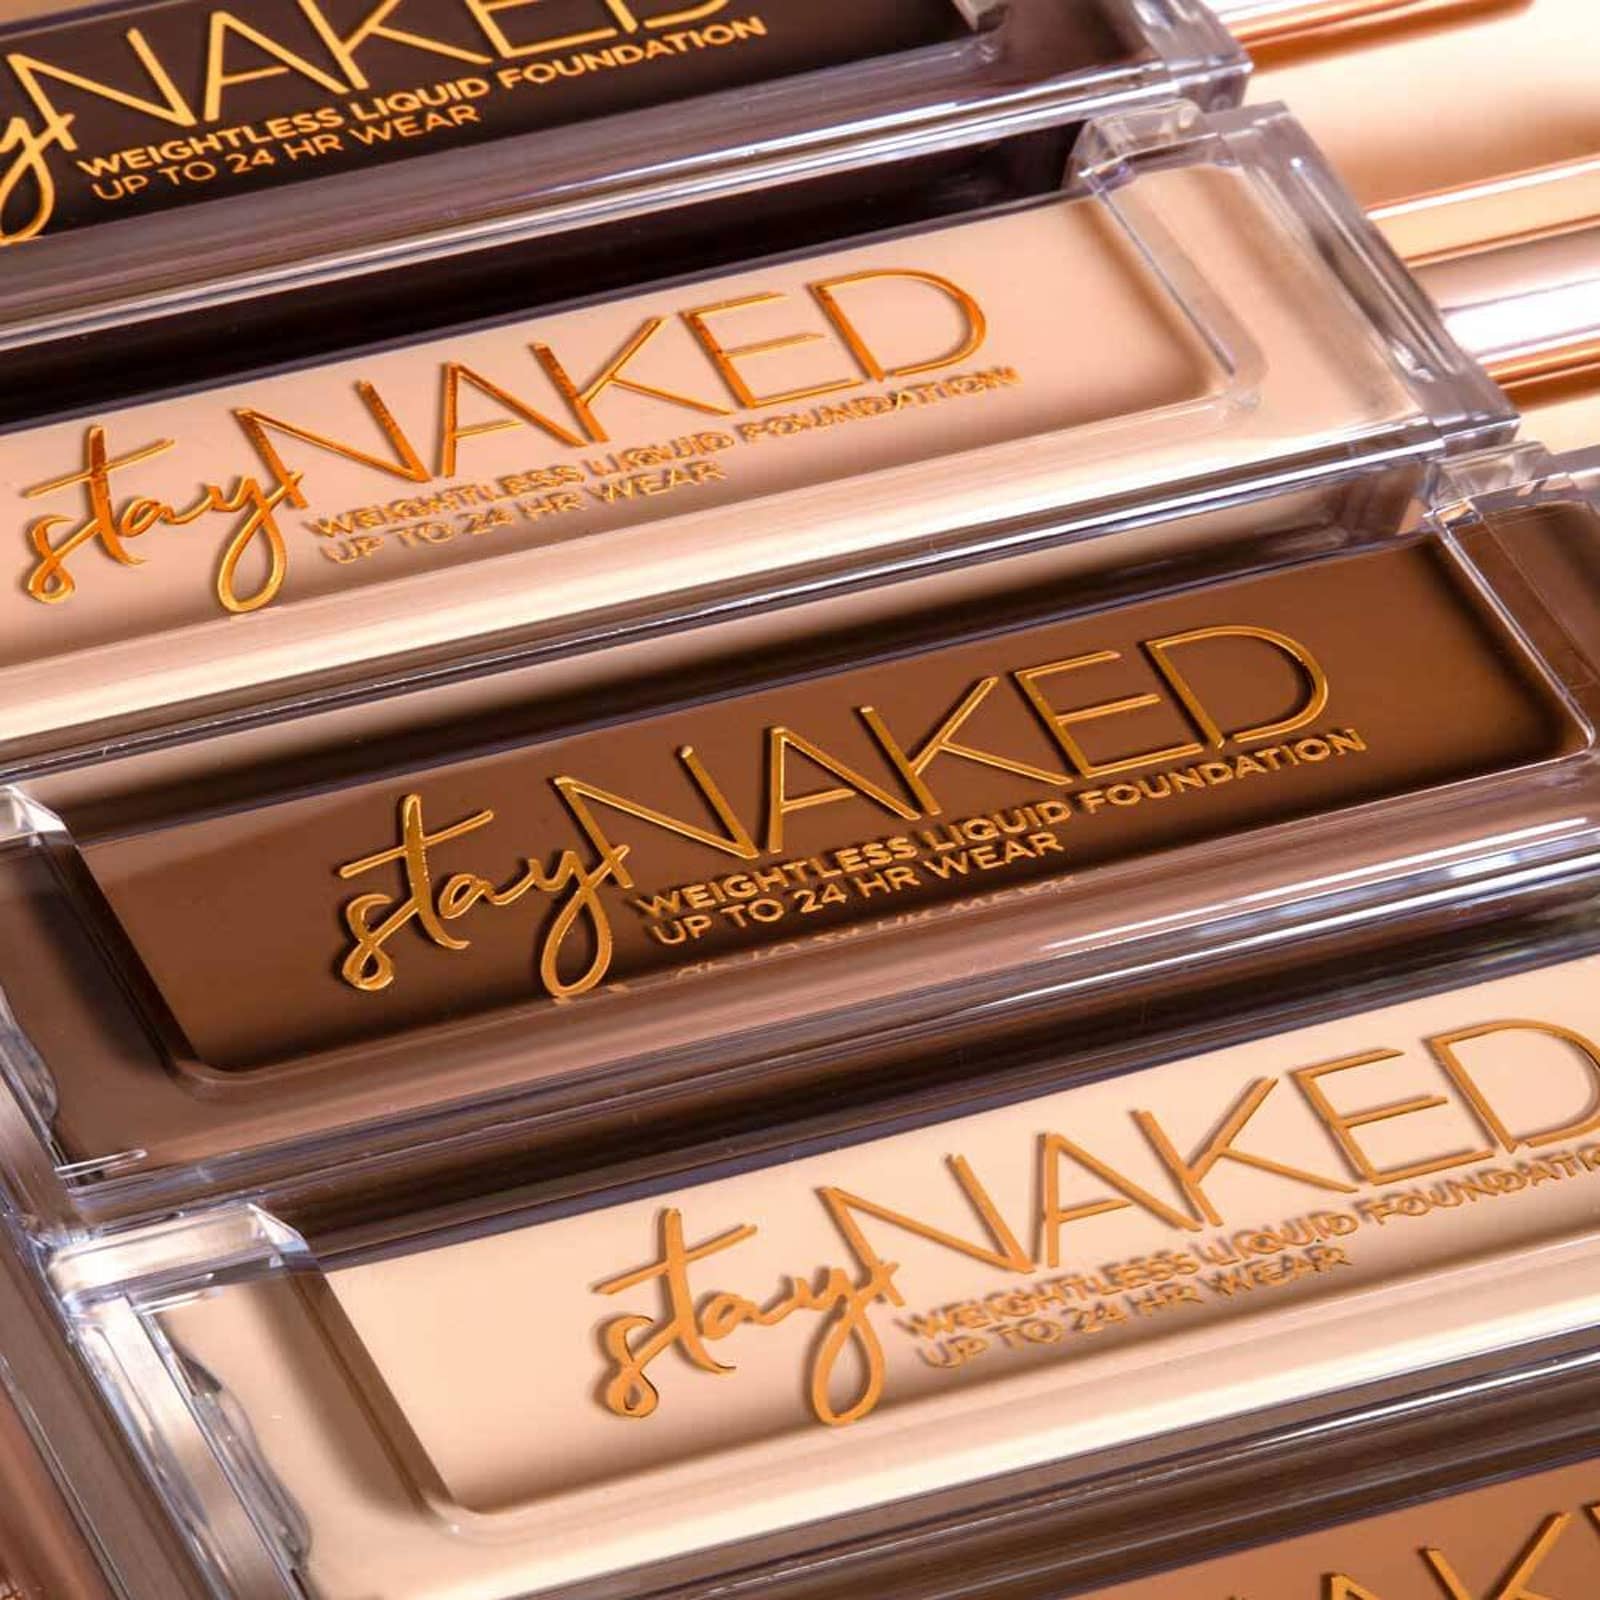 URBAN DECAY Stay Naked Weightless Liquid Foundation 